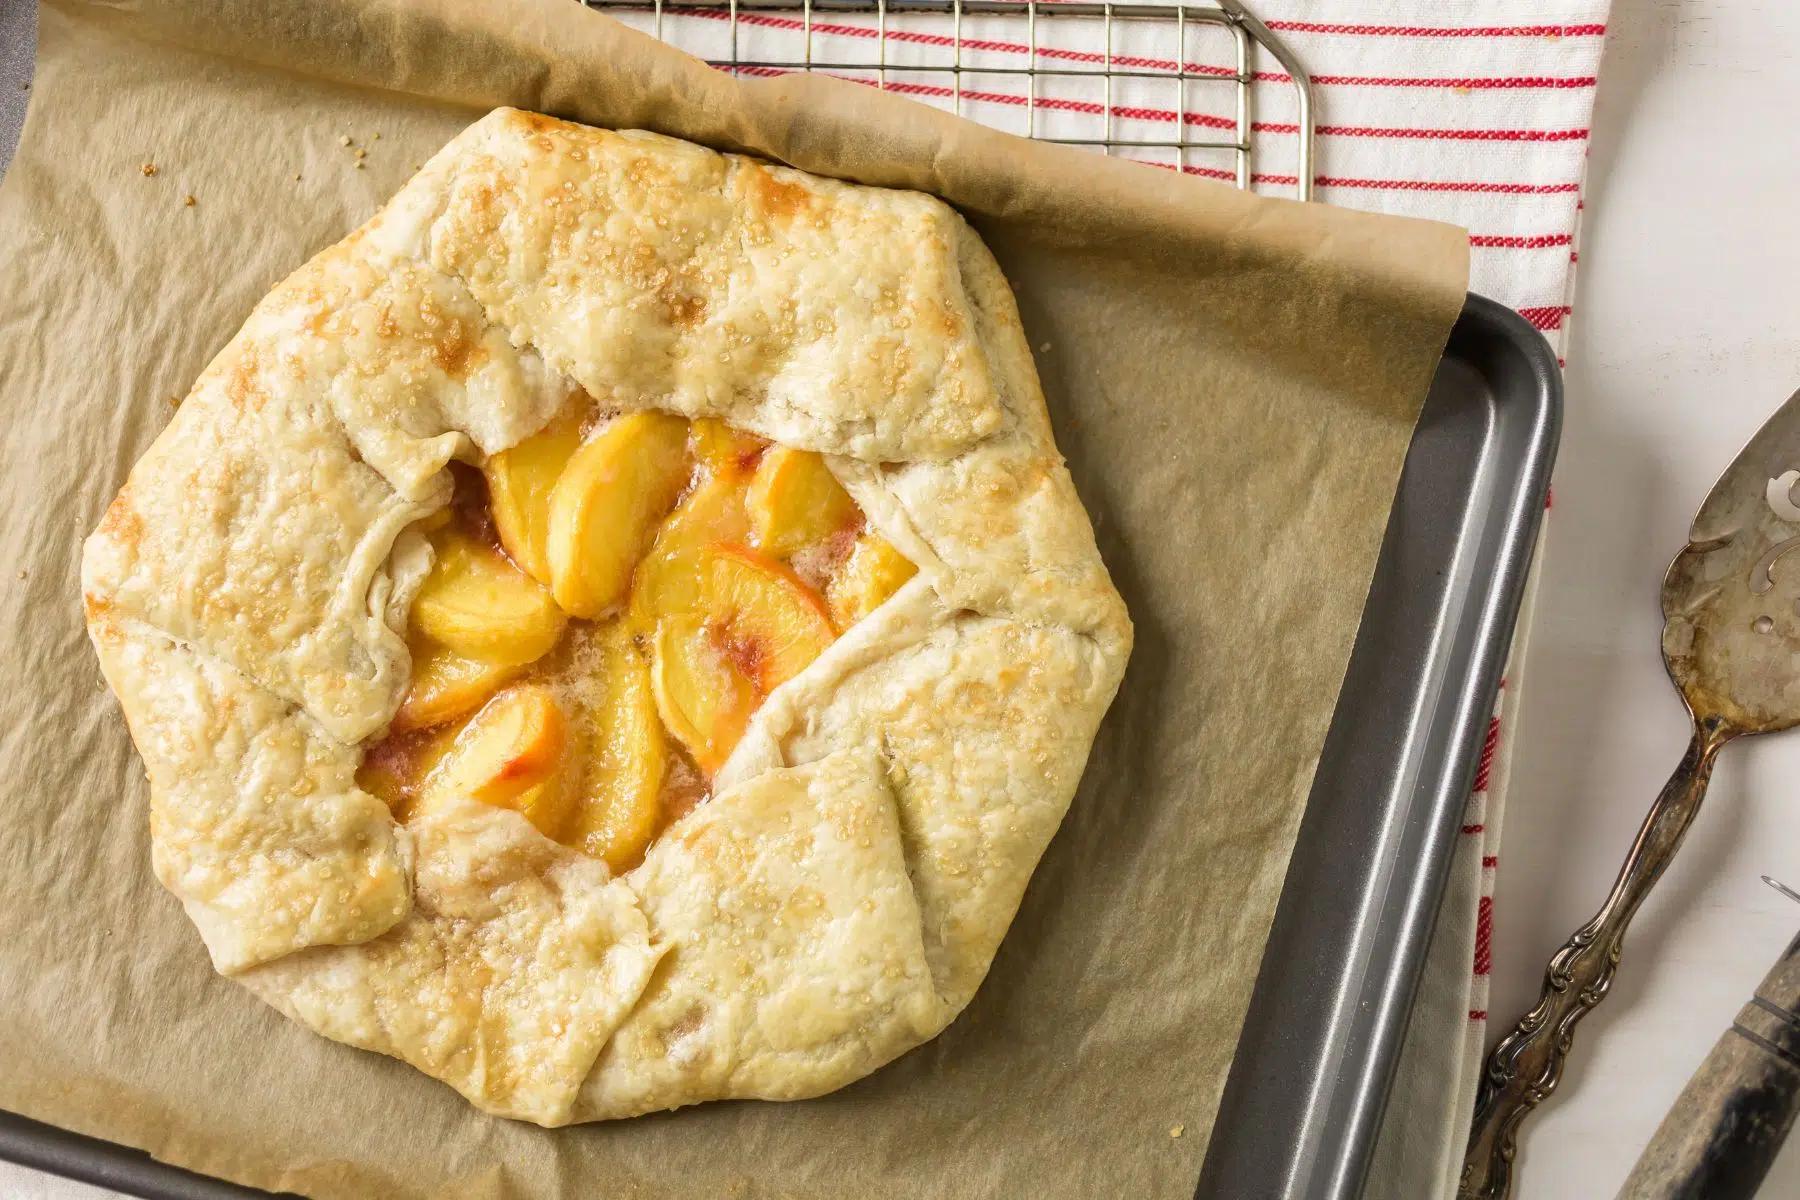 Process image 4 showing baked peach galette.